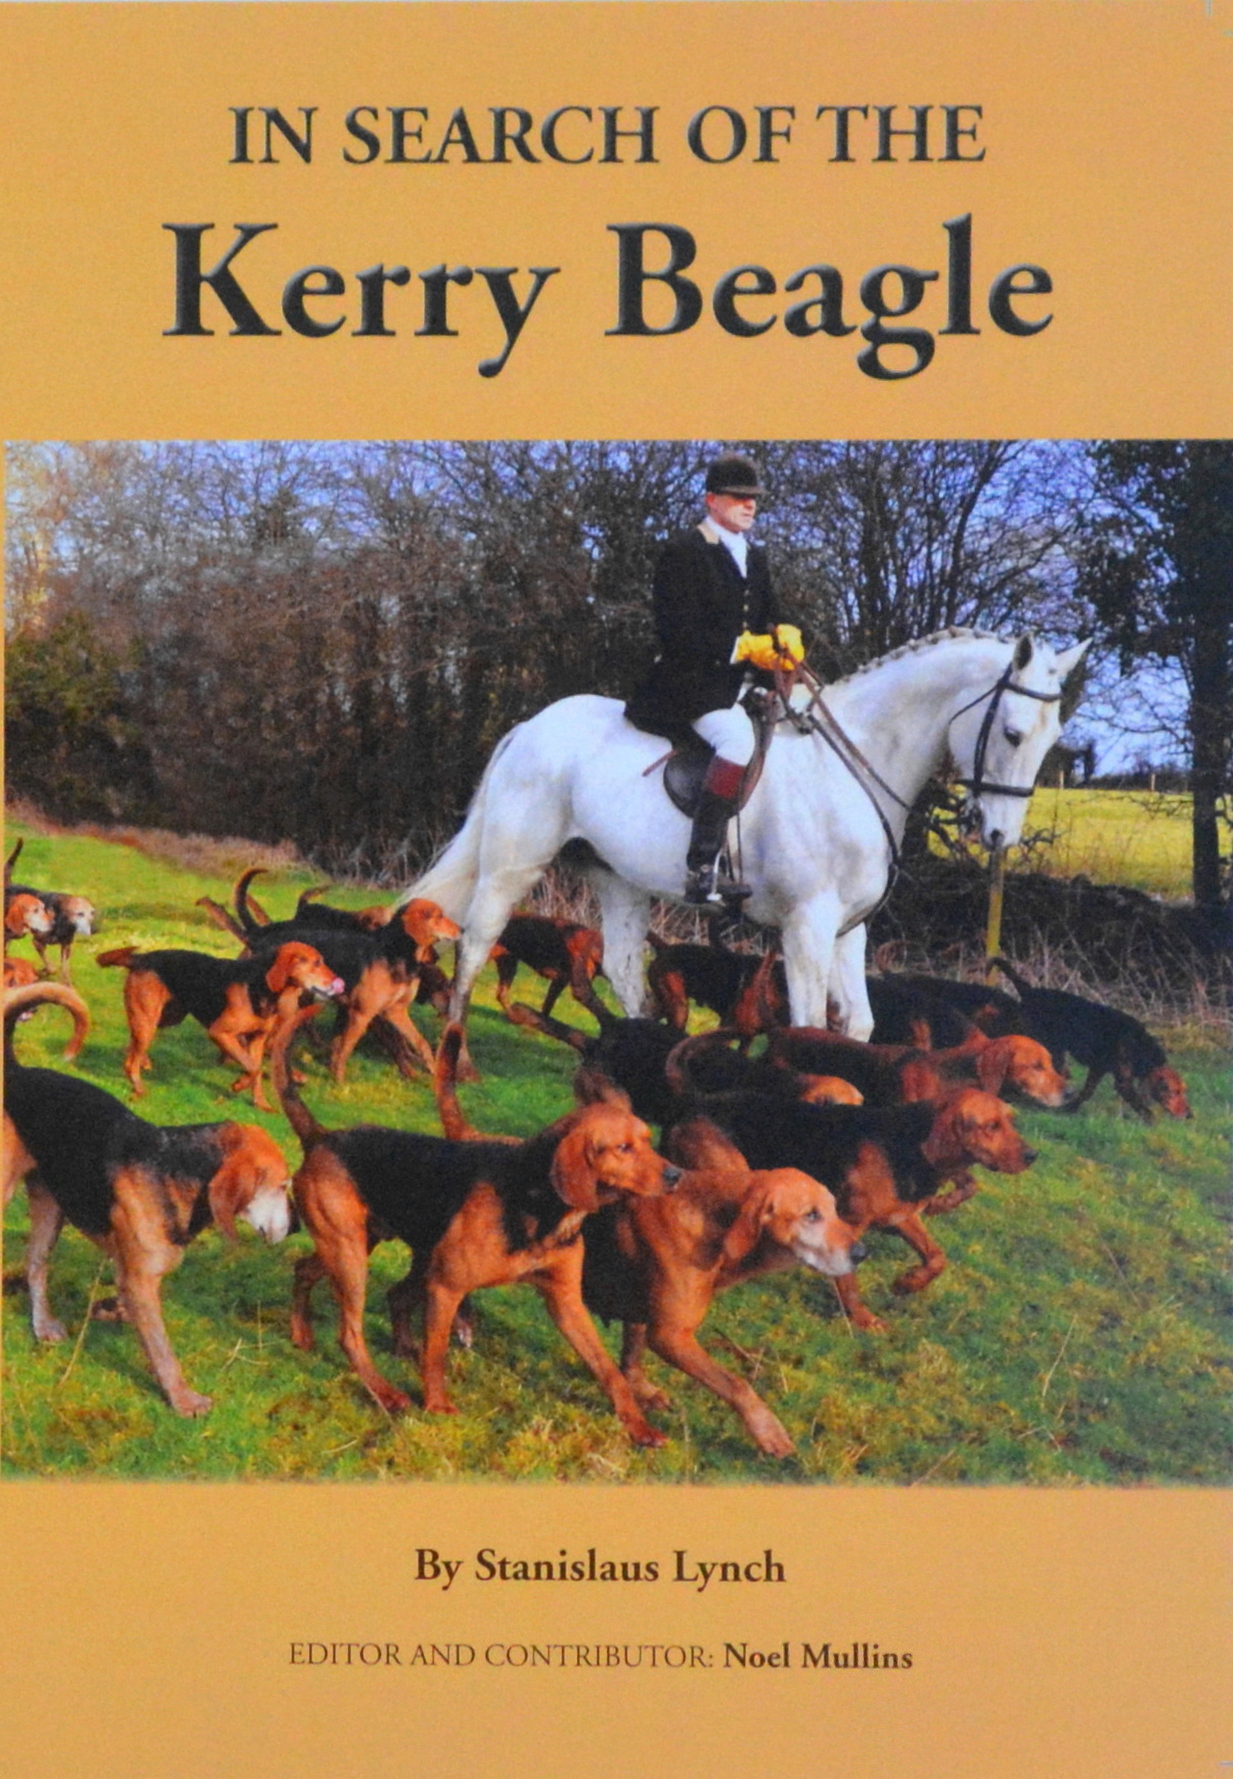 In Search Of The Kerry Beagle Noel Mullins Author Photo Journalist